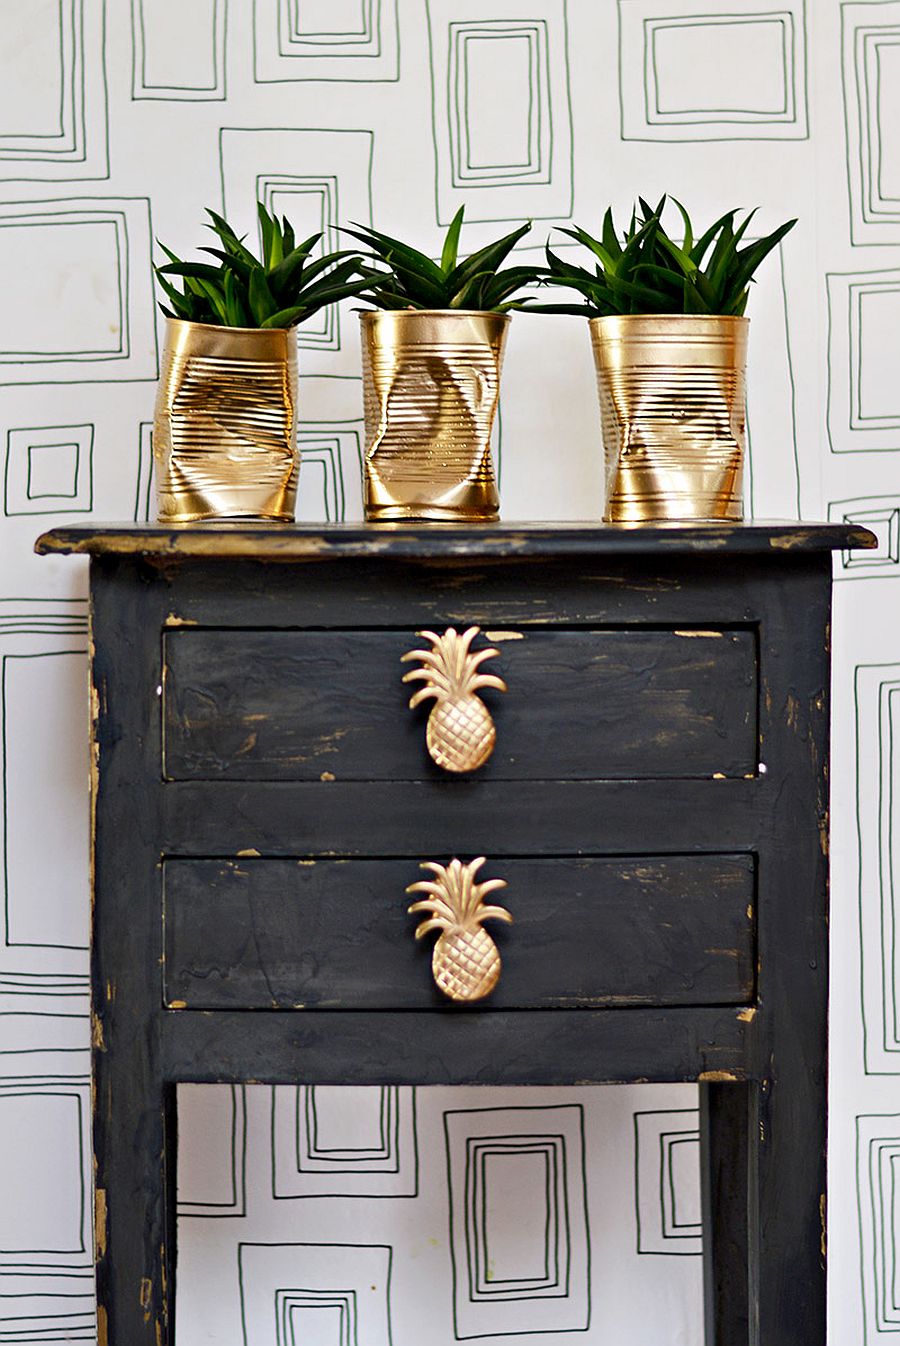 Crushed-Tin-Can-DIY-Planter-in-gold-takes-just-10-minutes-to-craft